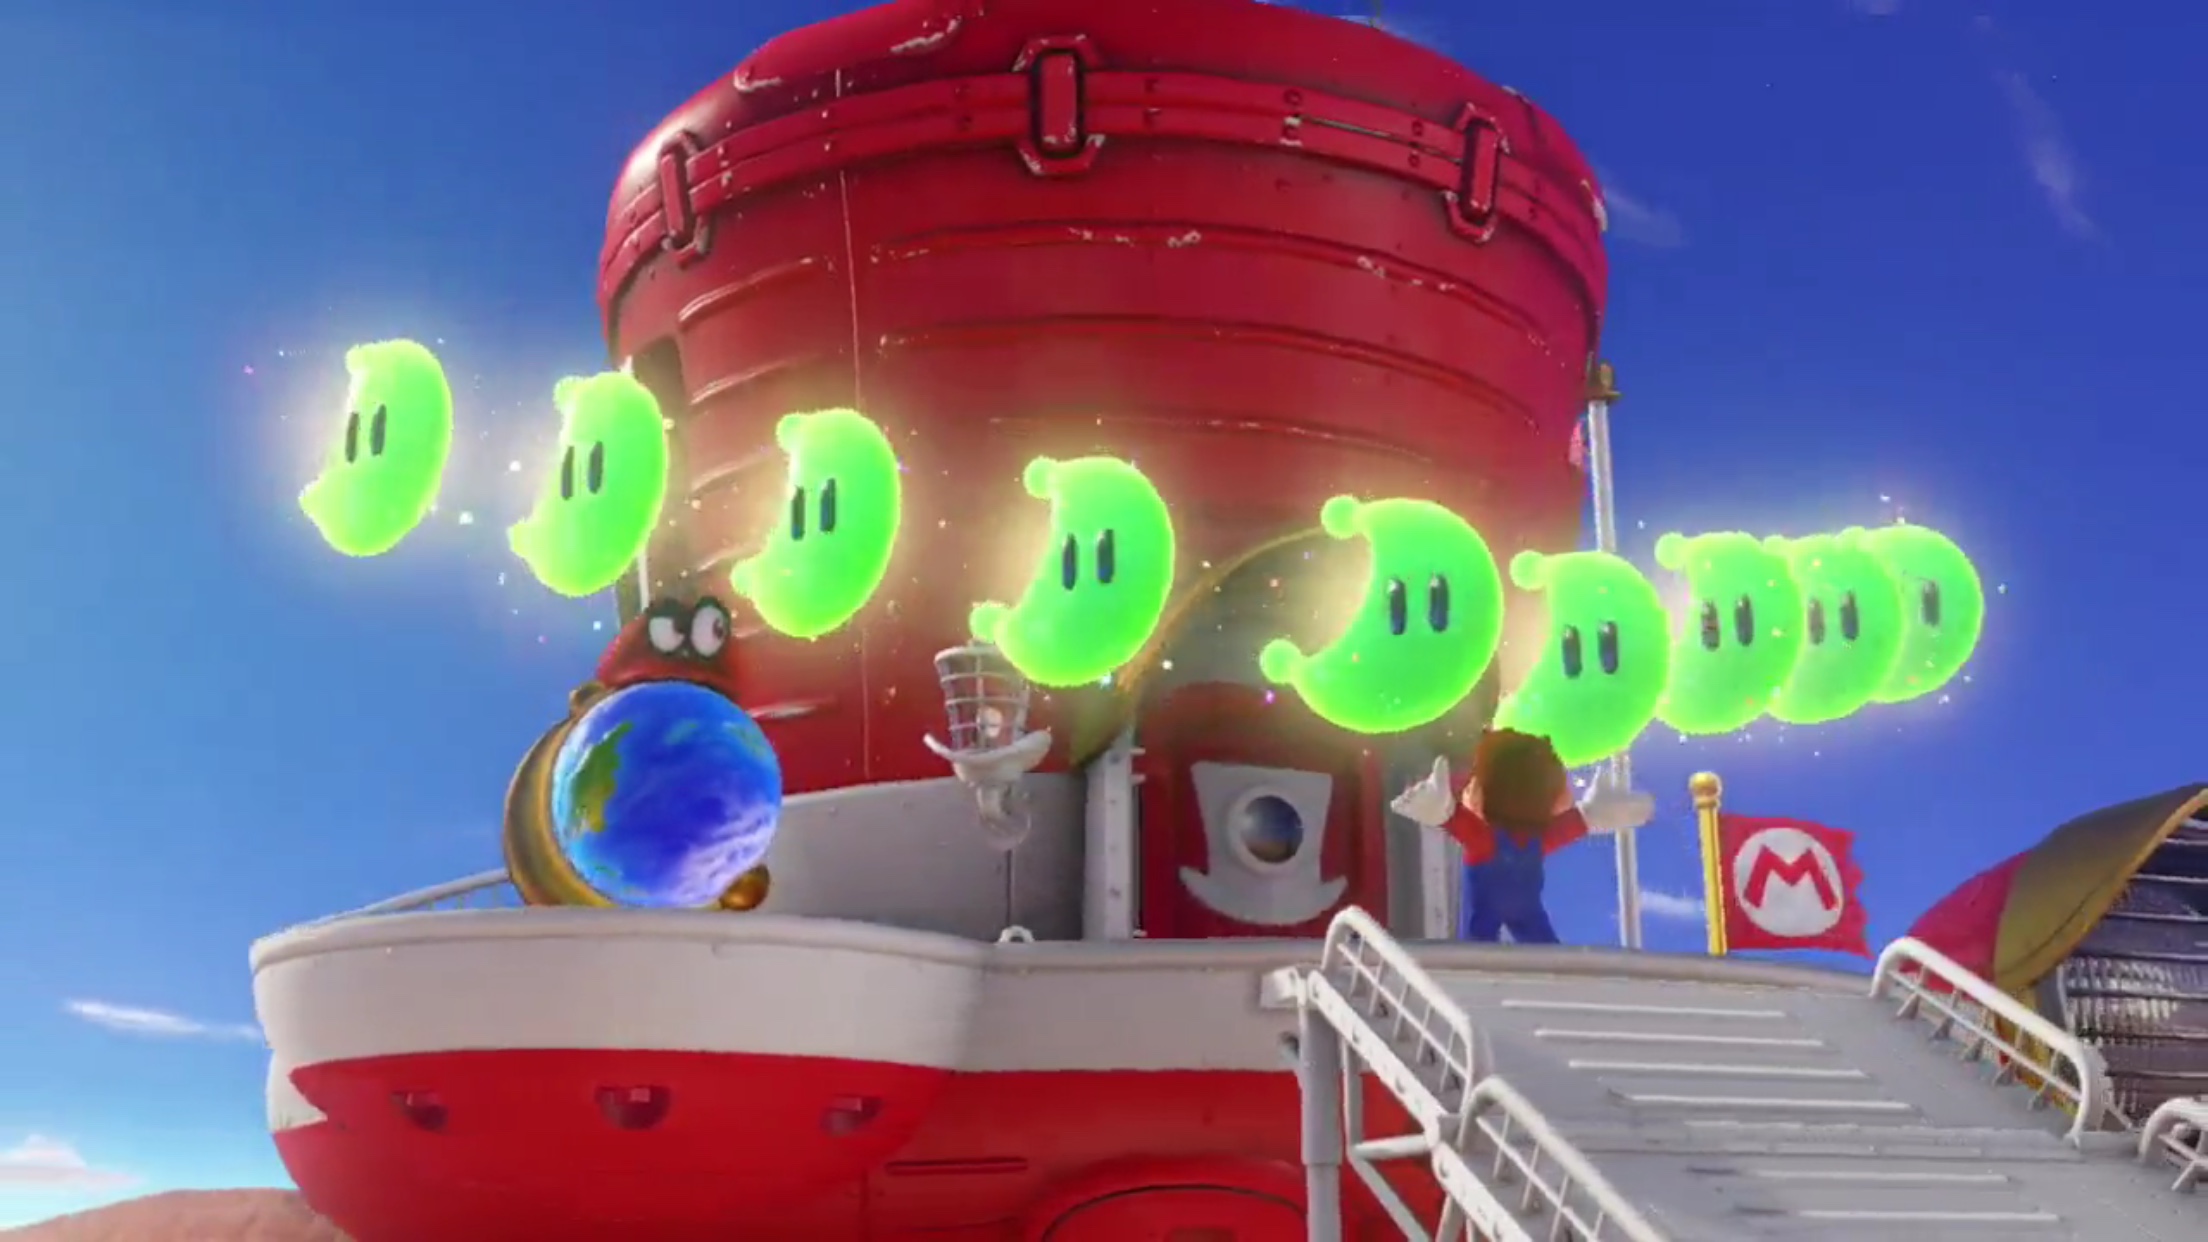 After Collecting 880 Power Moons in Super Mario Odyssey